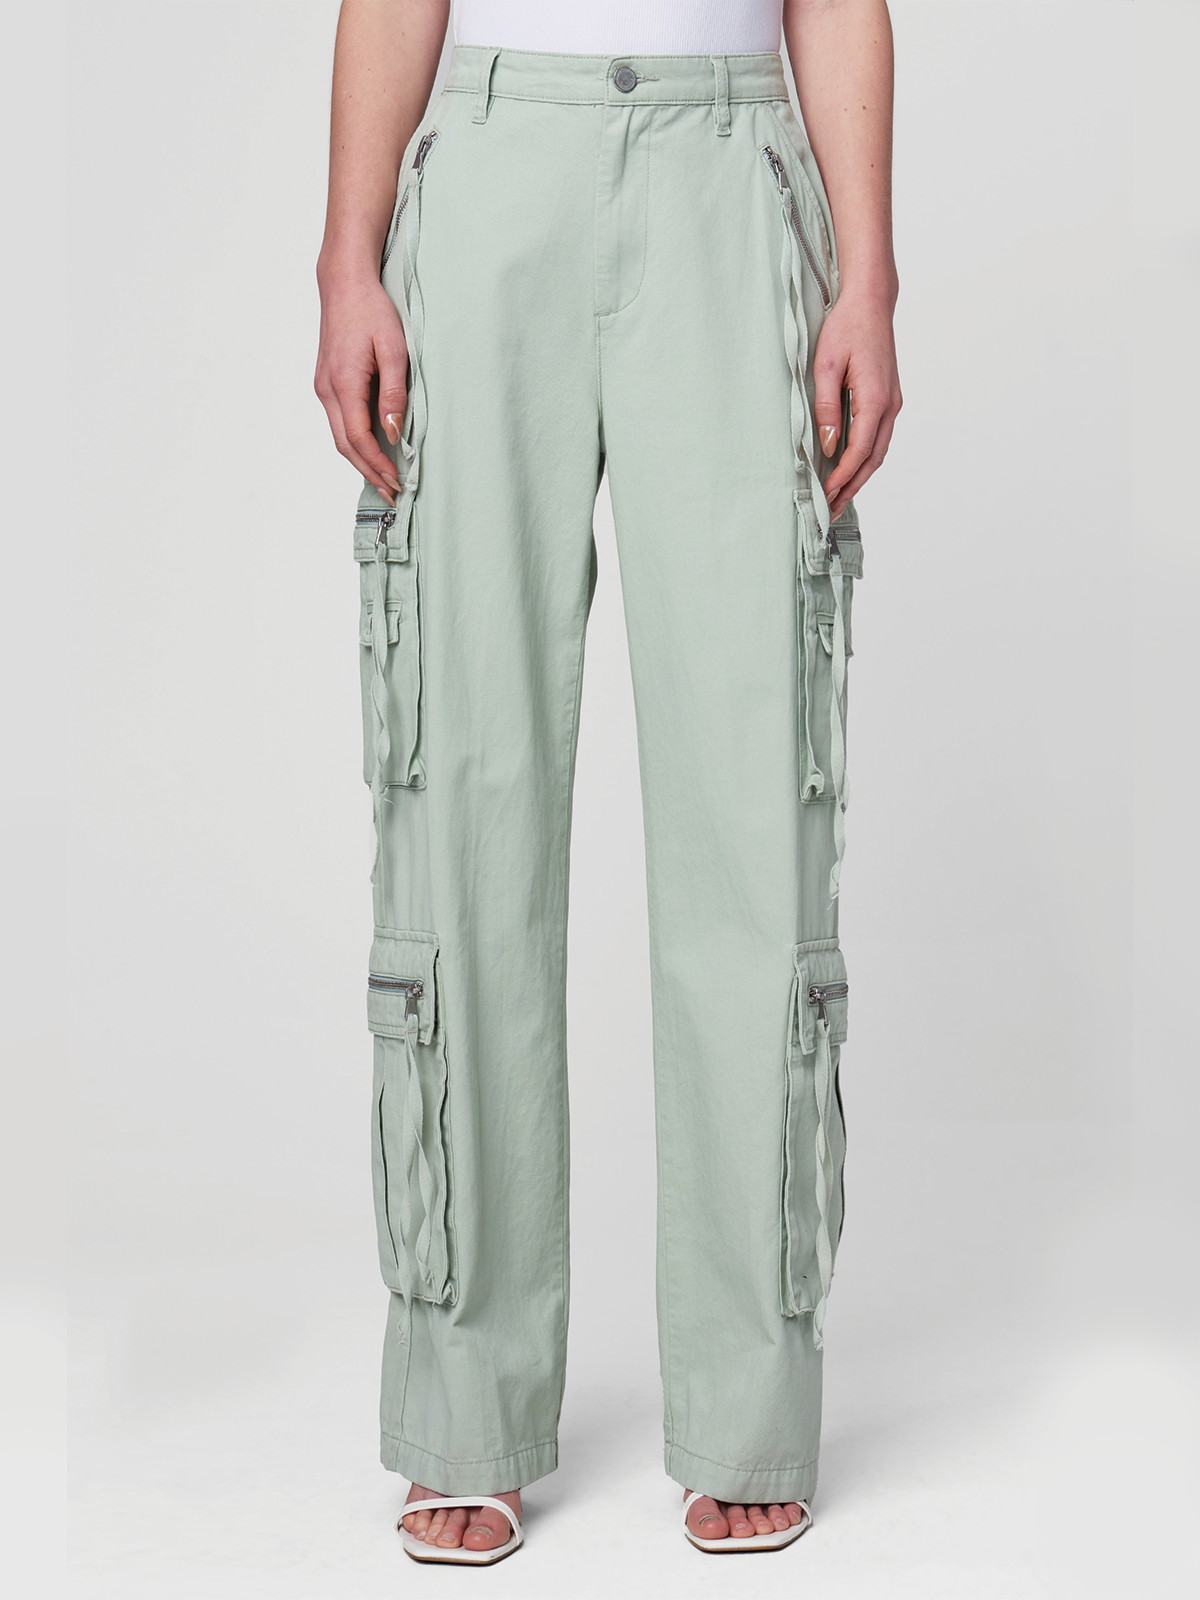 Zen Time Linen Cargo Pocket Pant, Pant Bottom by Blank NYC | LIT Boutique